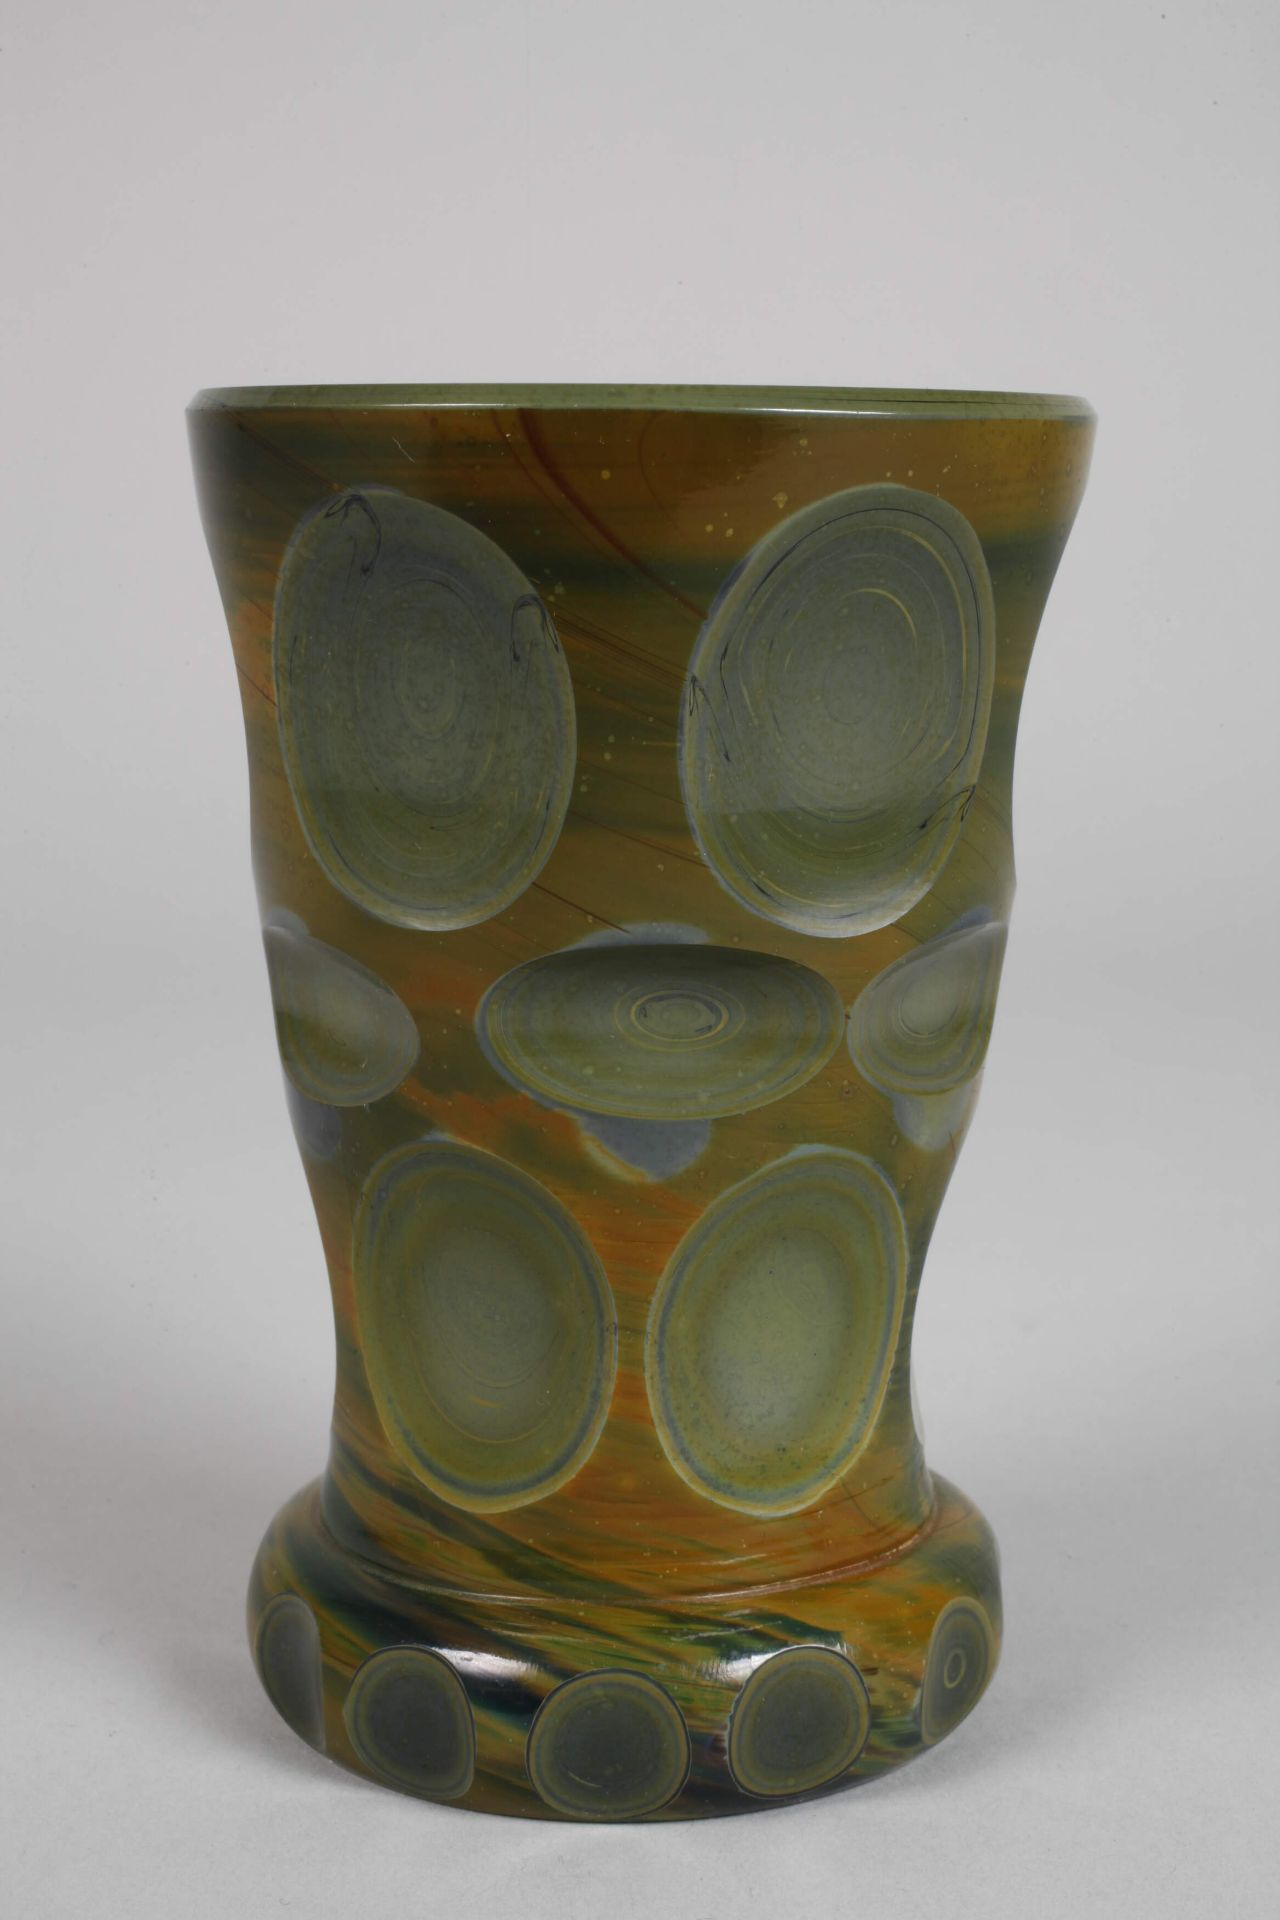 Lithyalin glass goblet - Image 2 of 3